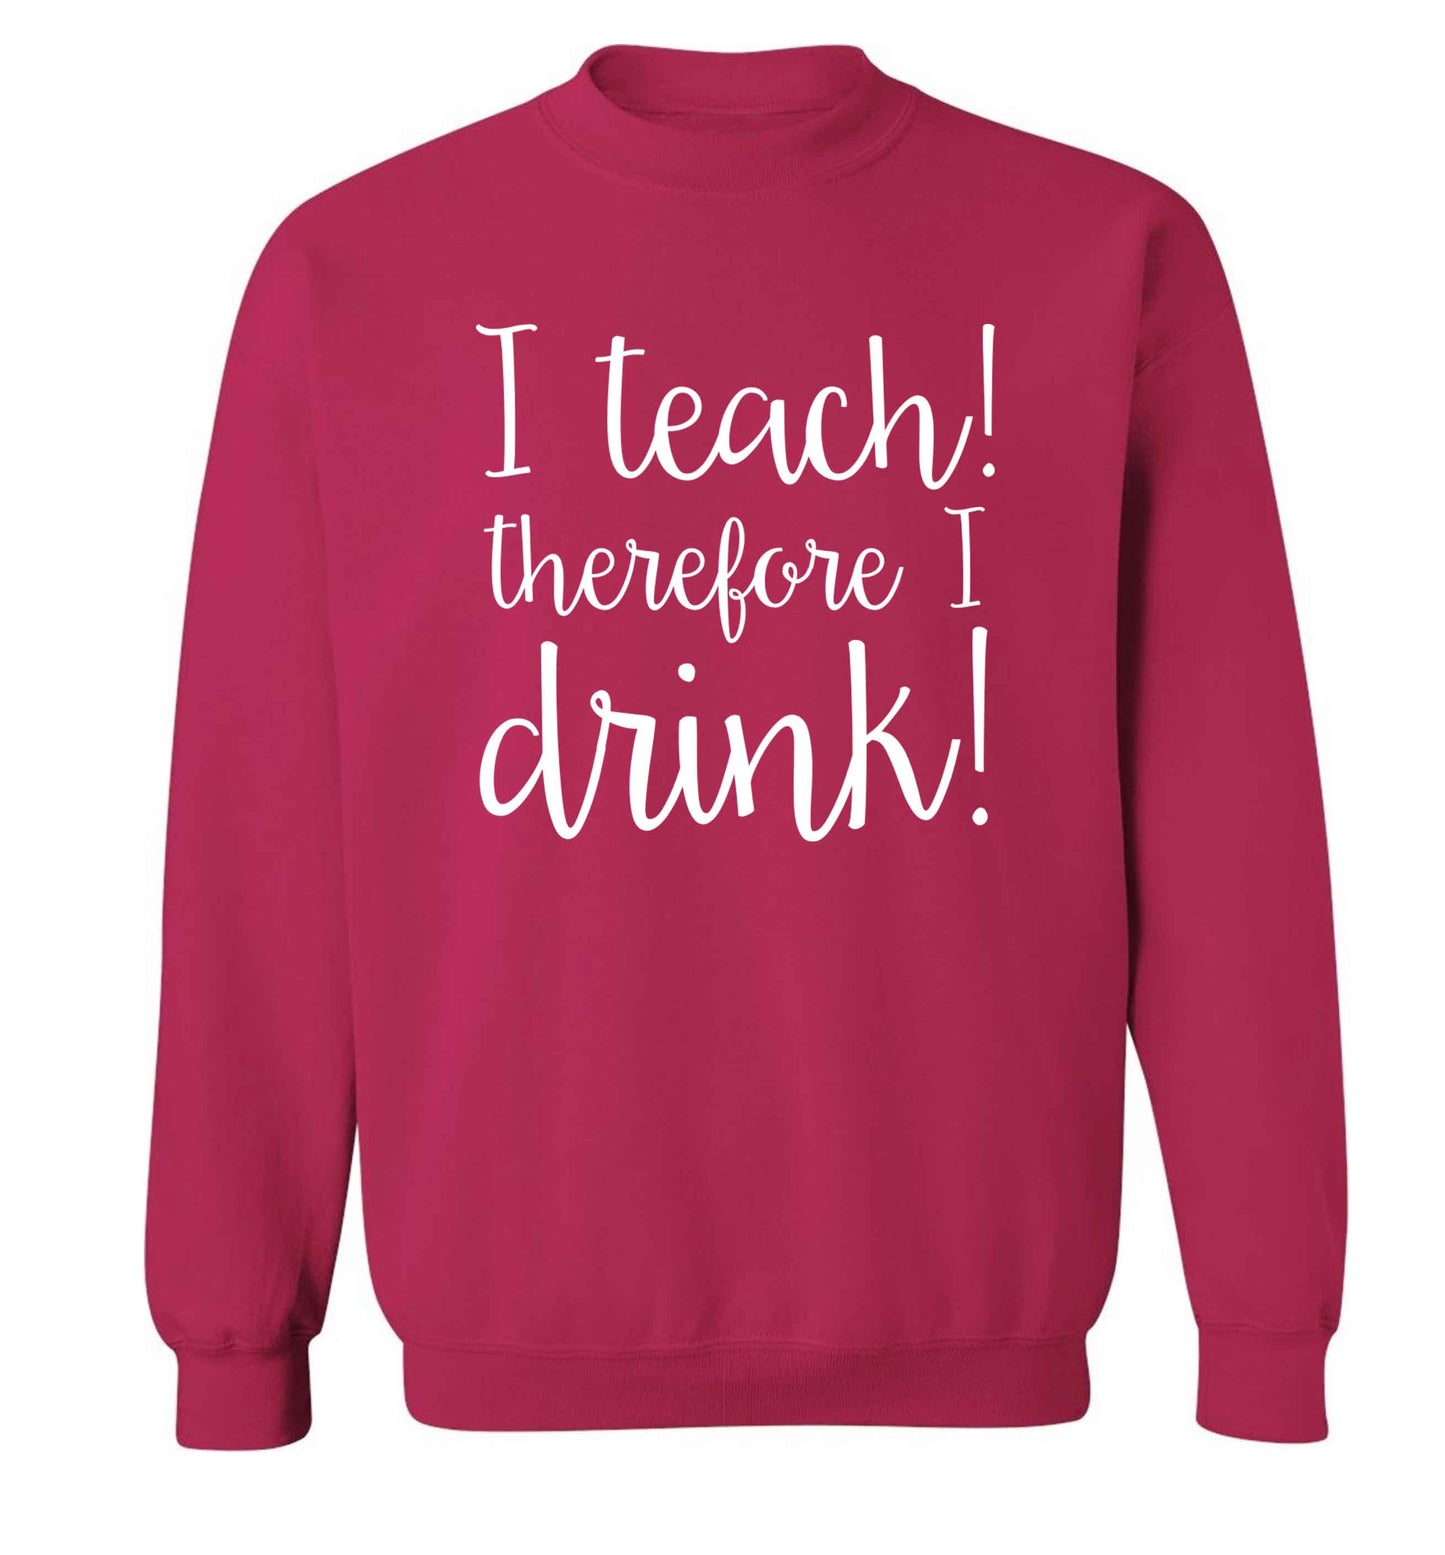 I teach therefore I drink adult's unisex pink sweater 2XL